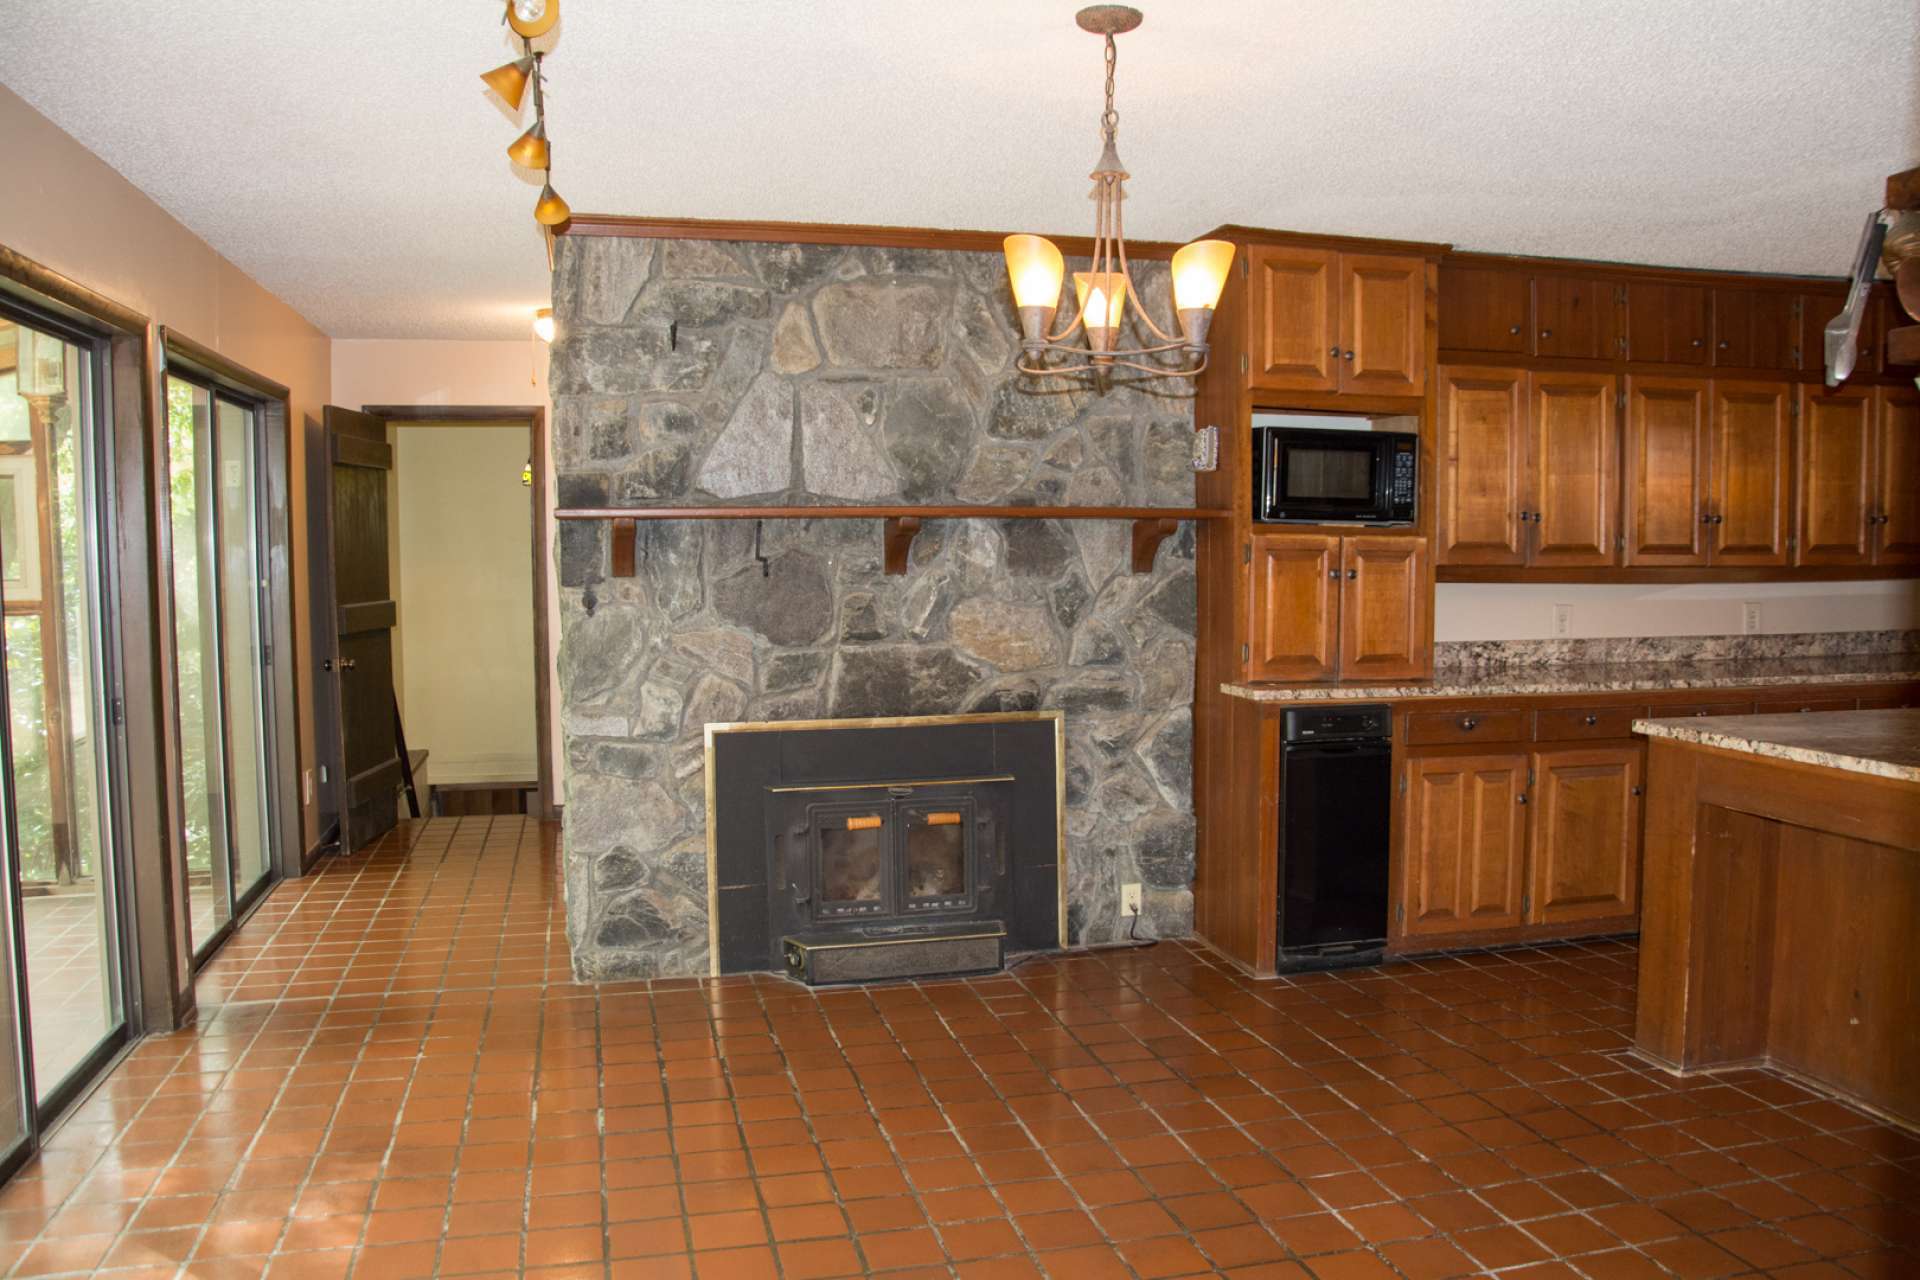 The kitchen is open to an informal dining area featuring a second fireplace with wood stove insert, and lots of glass for natural light.